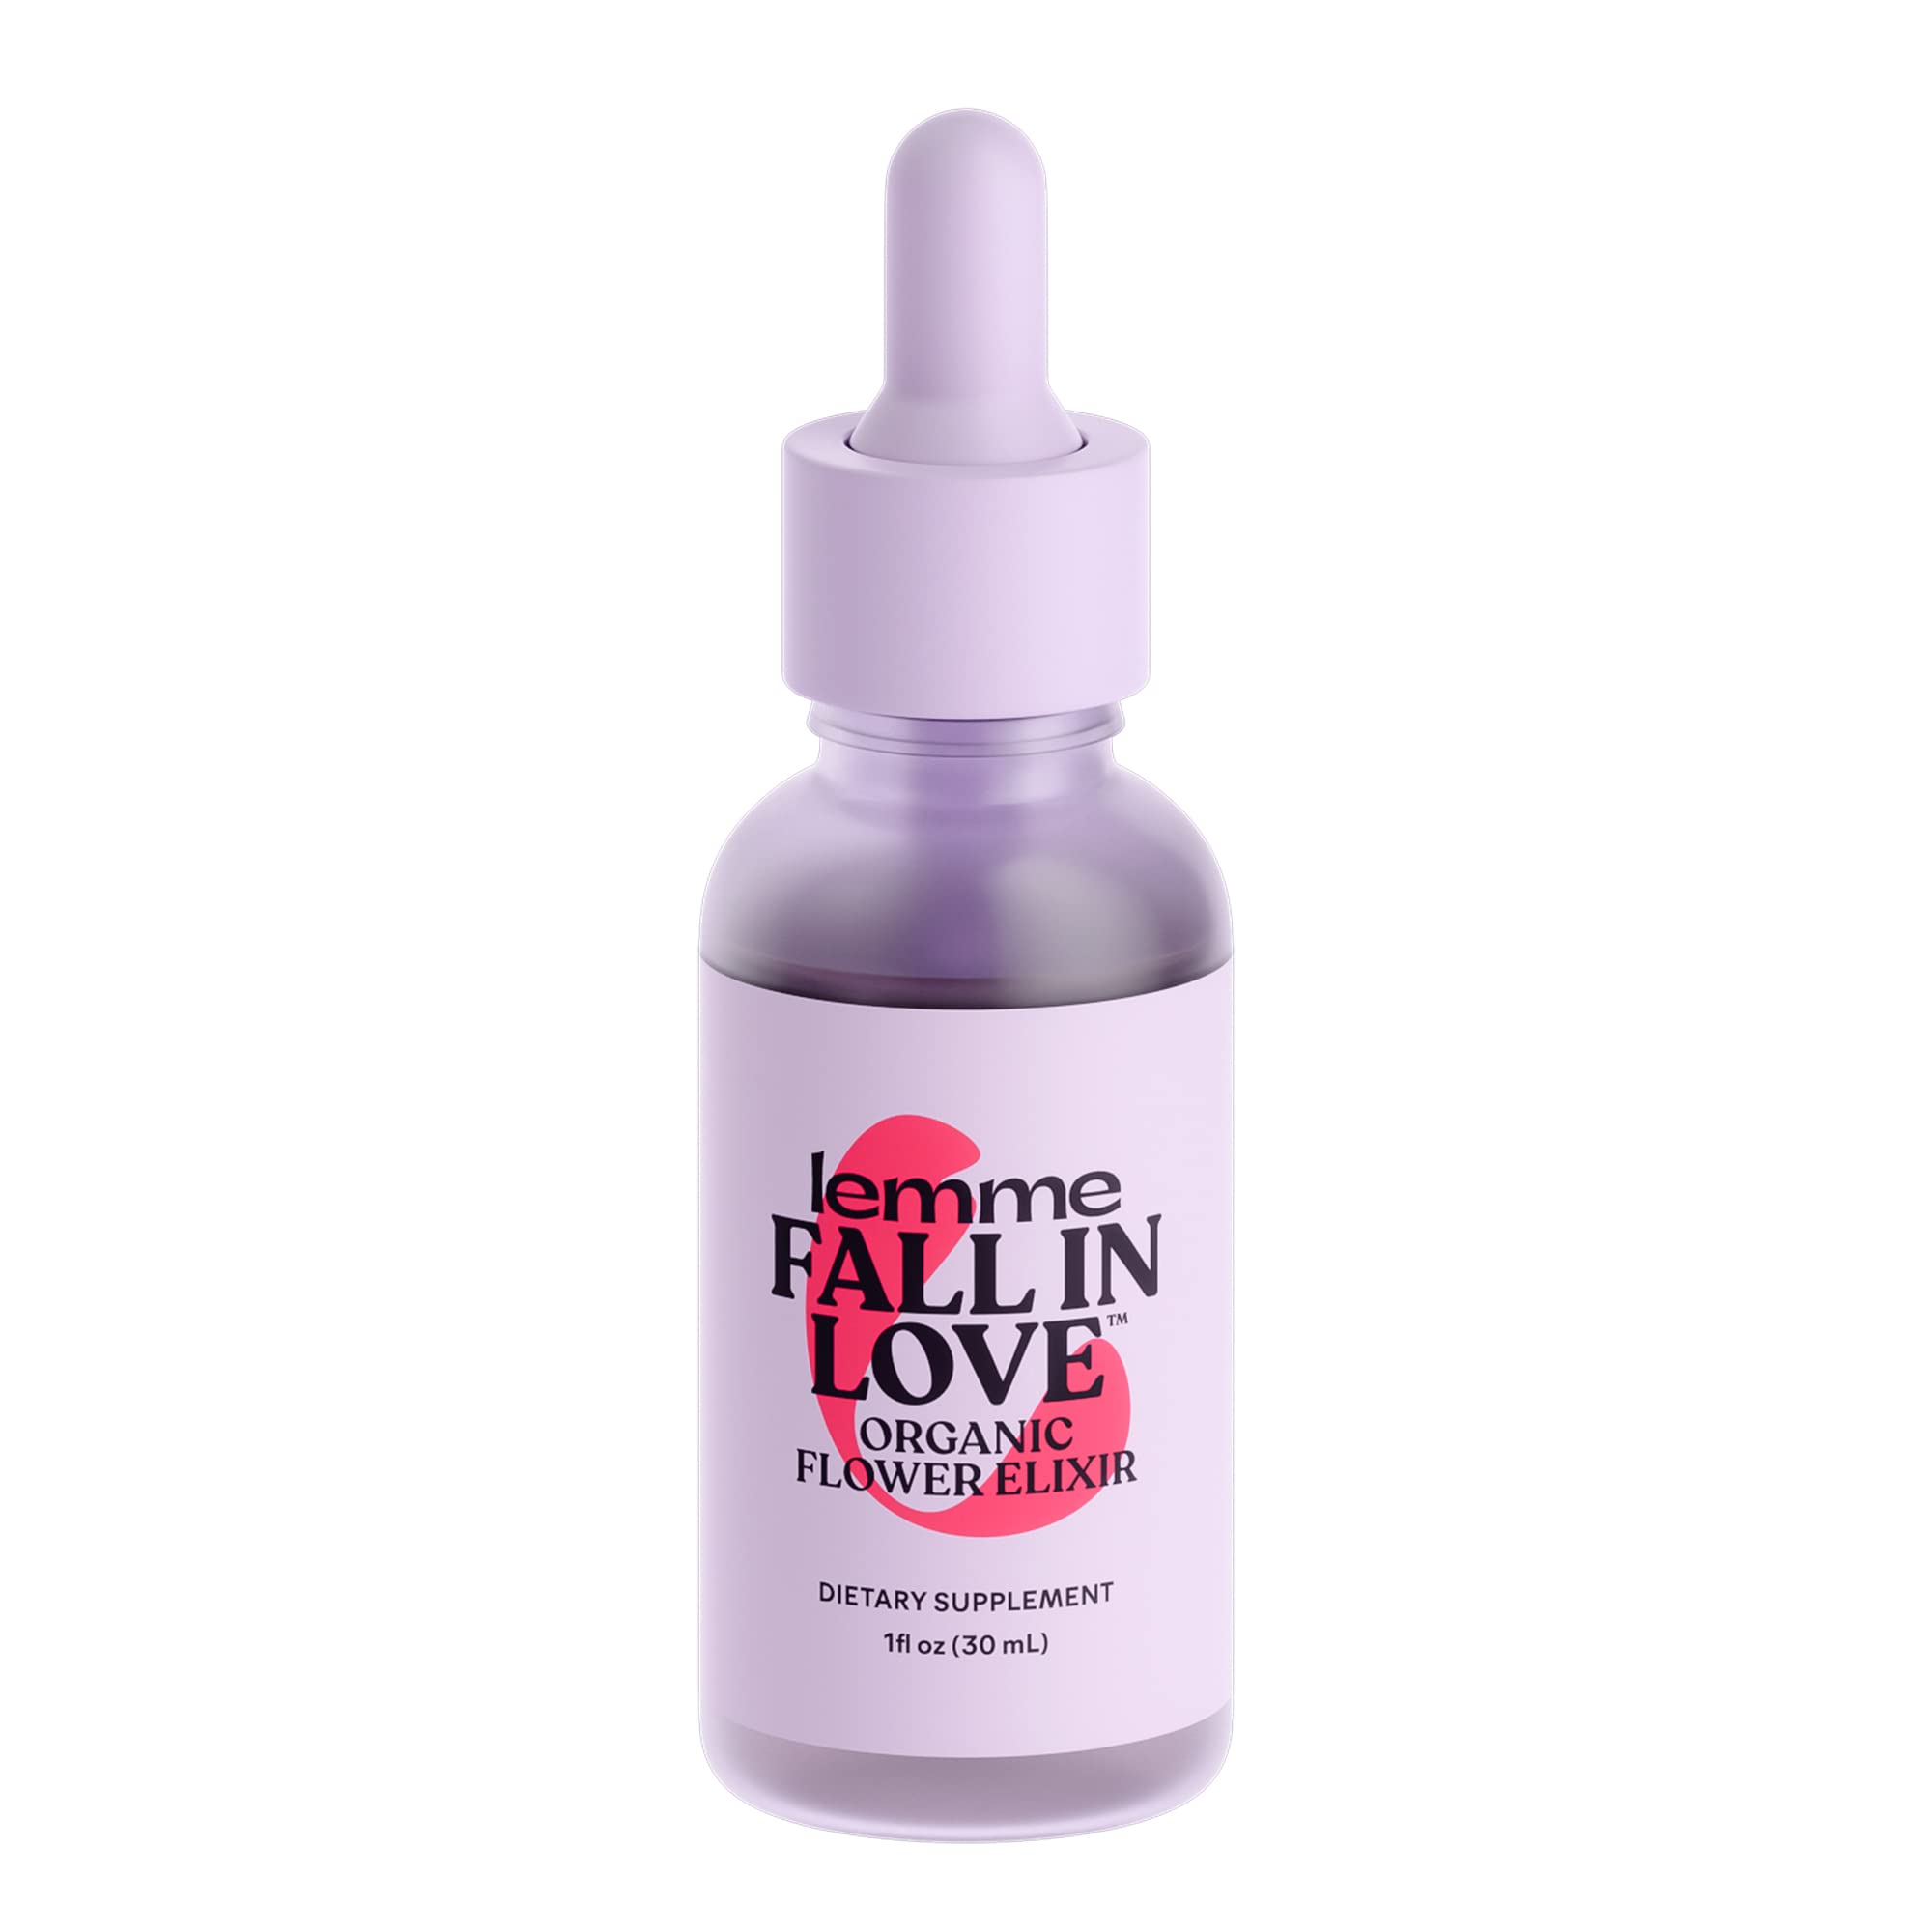 Lemme Fall in Love Organic Flower Elixir with 8 Love Boosting Botanicals for Love, Vitality & Romance - Damiana, Honeysuckle, Rose, Ginger Root - Vegan, Gluten Free, Non GMO - Unflavored, 1 fl oz